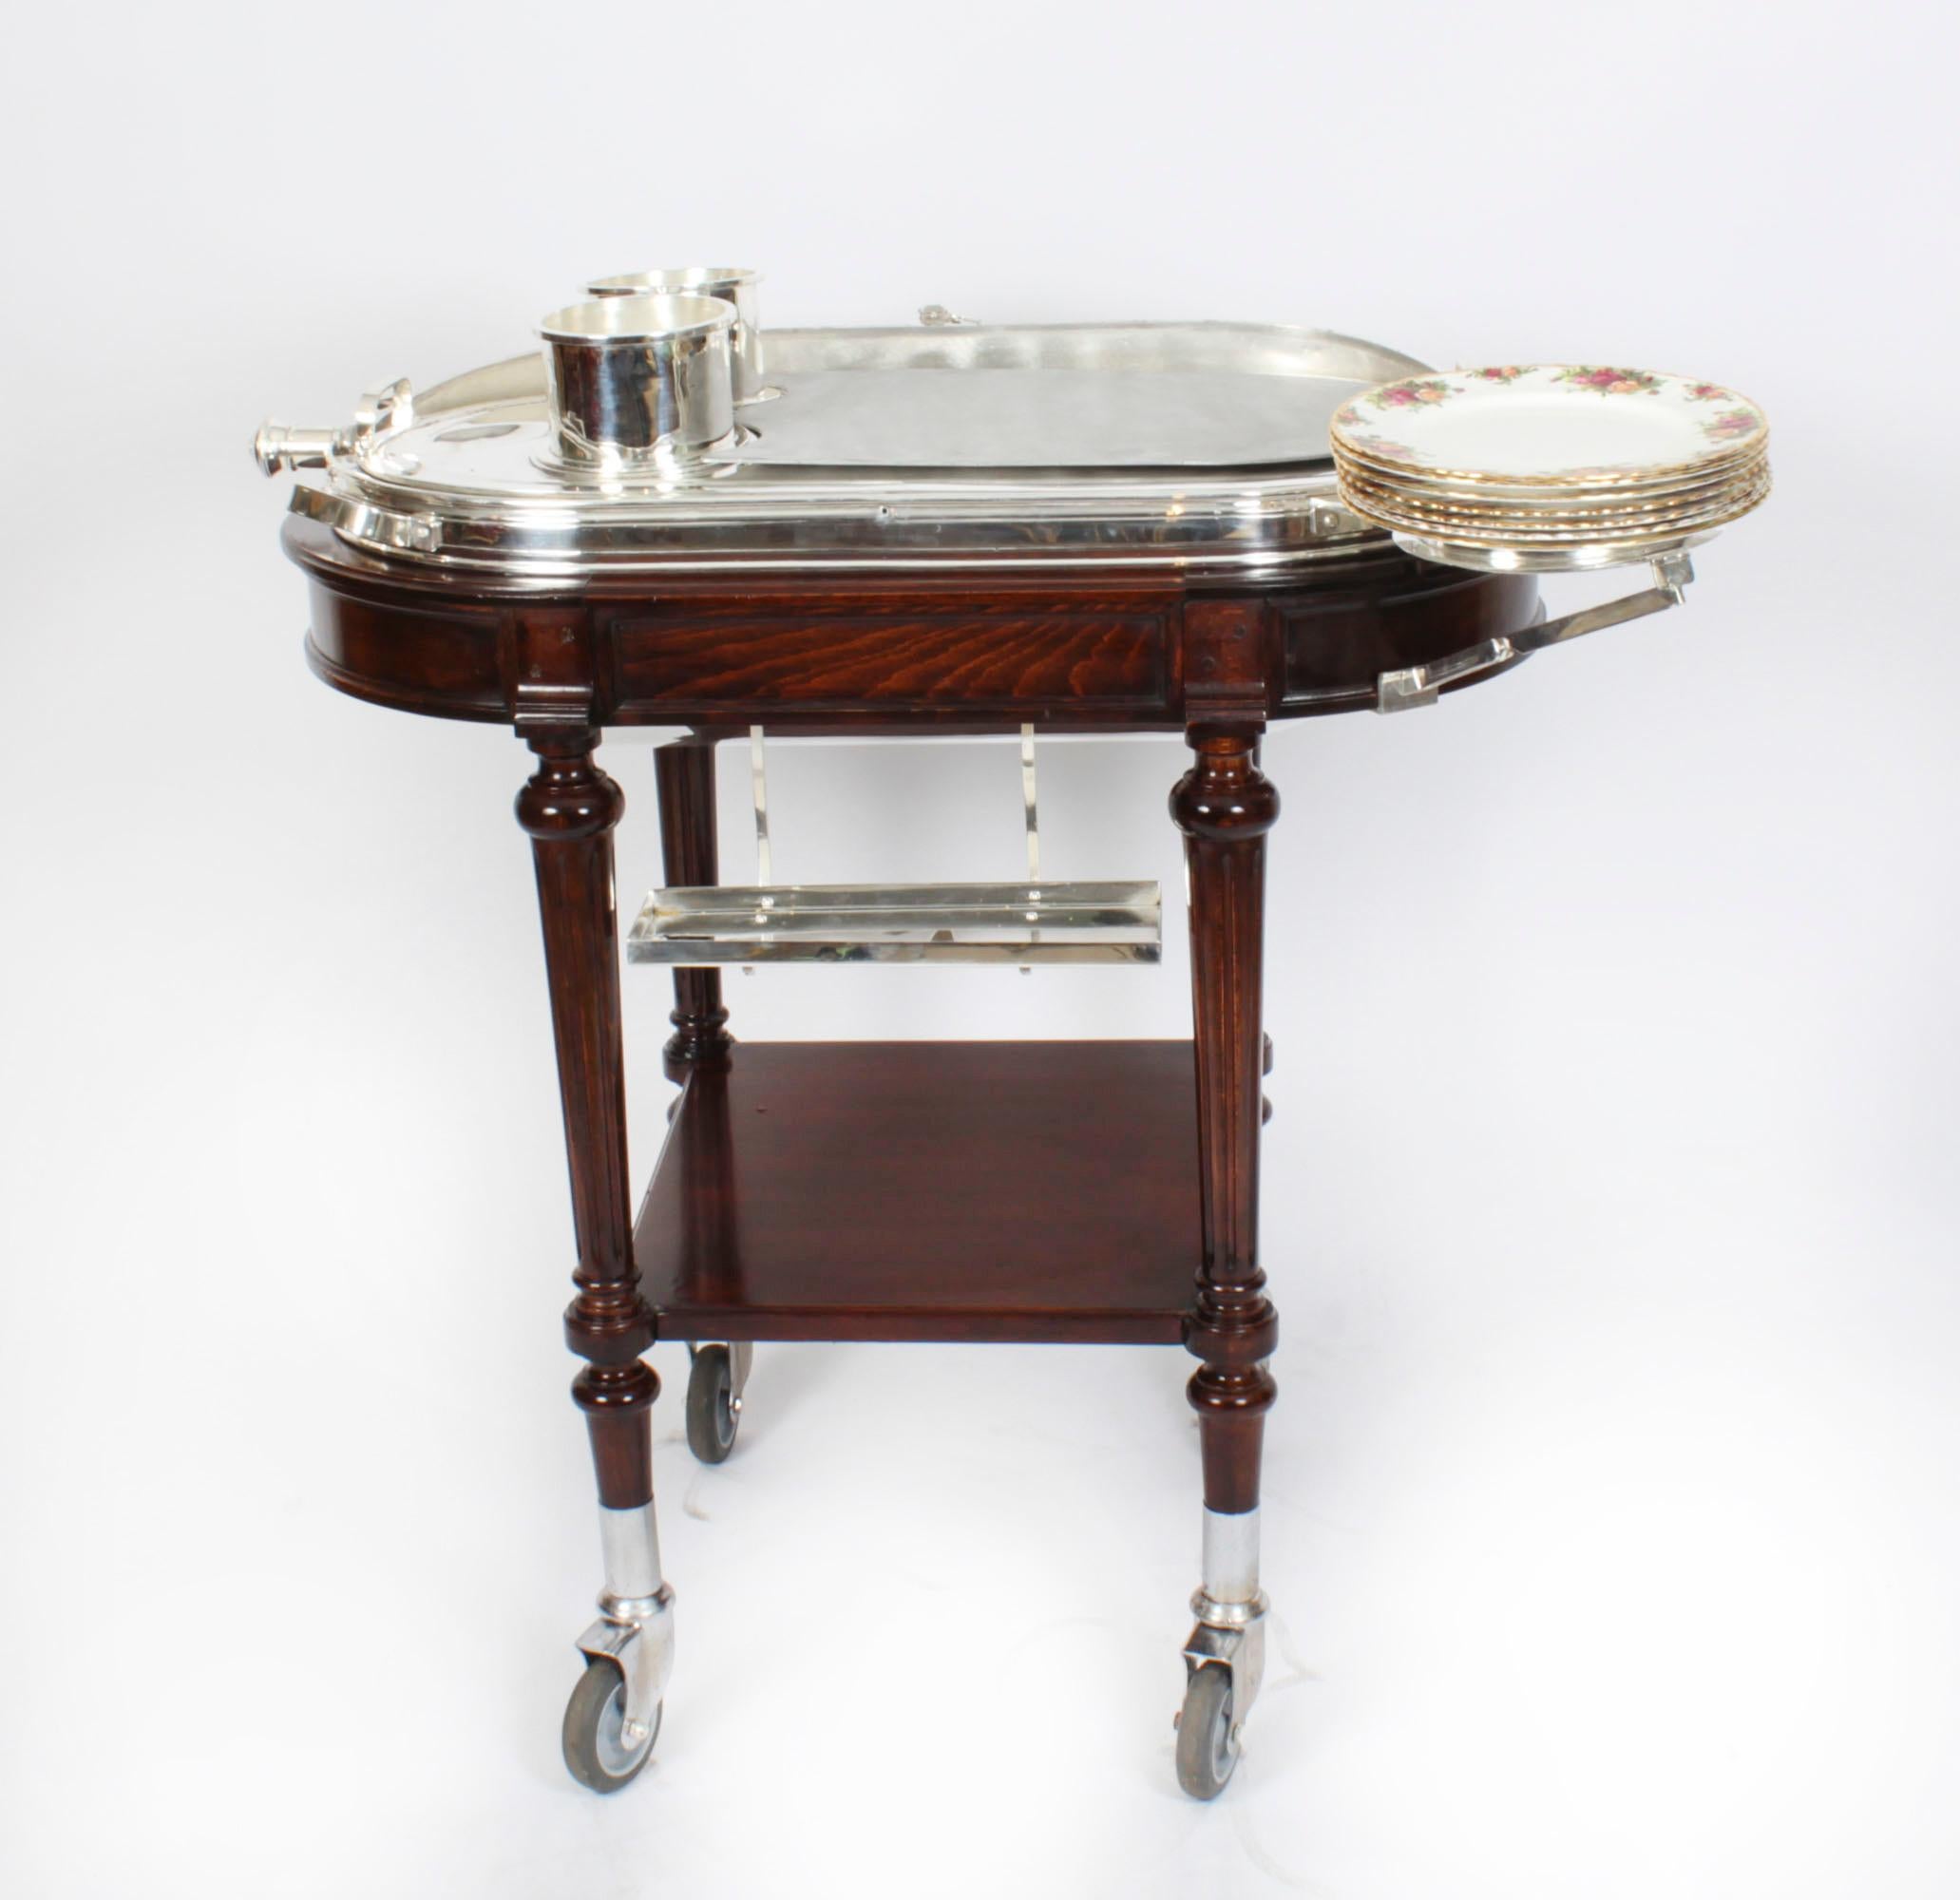 Early 20th Century Antique Art Deco Silver Plated Beef Carving Trolley Beef Wagon, 1920s